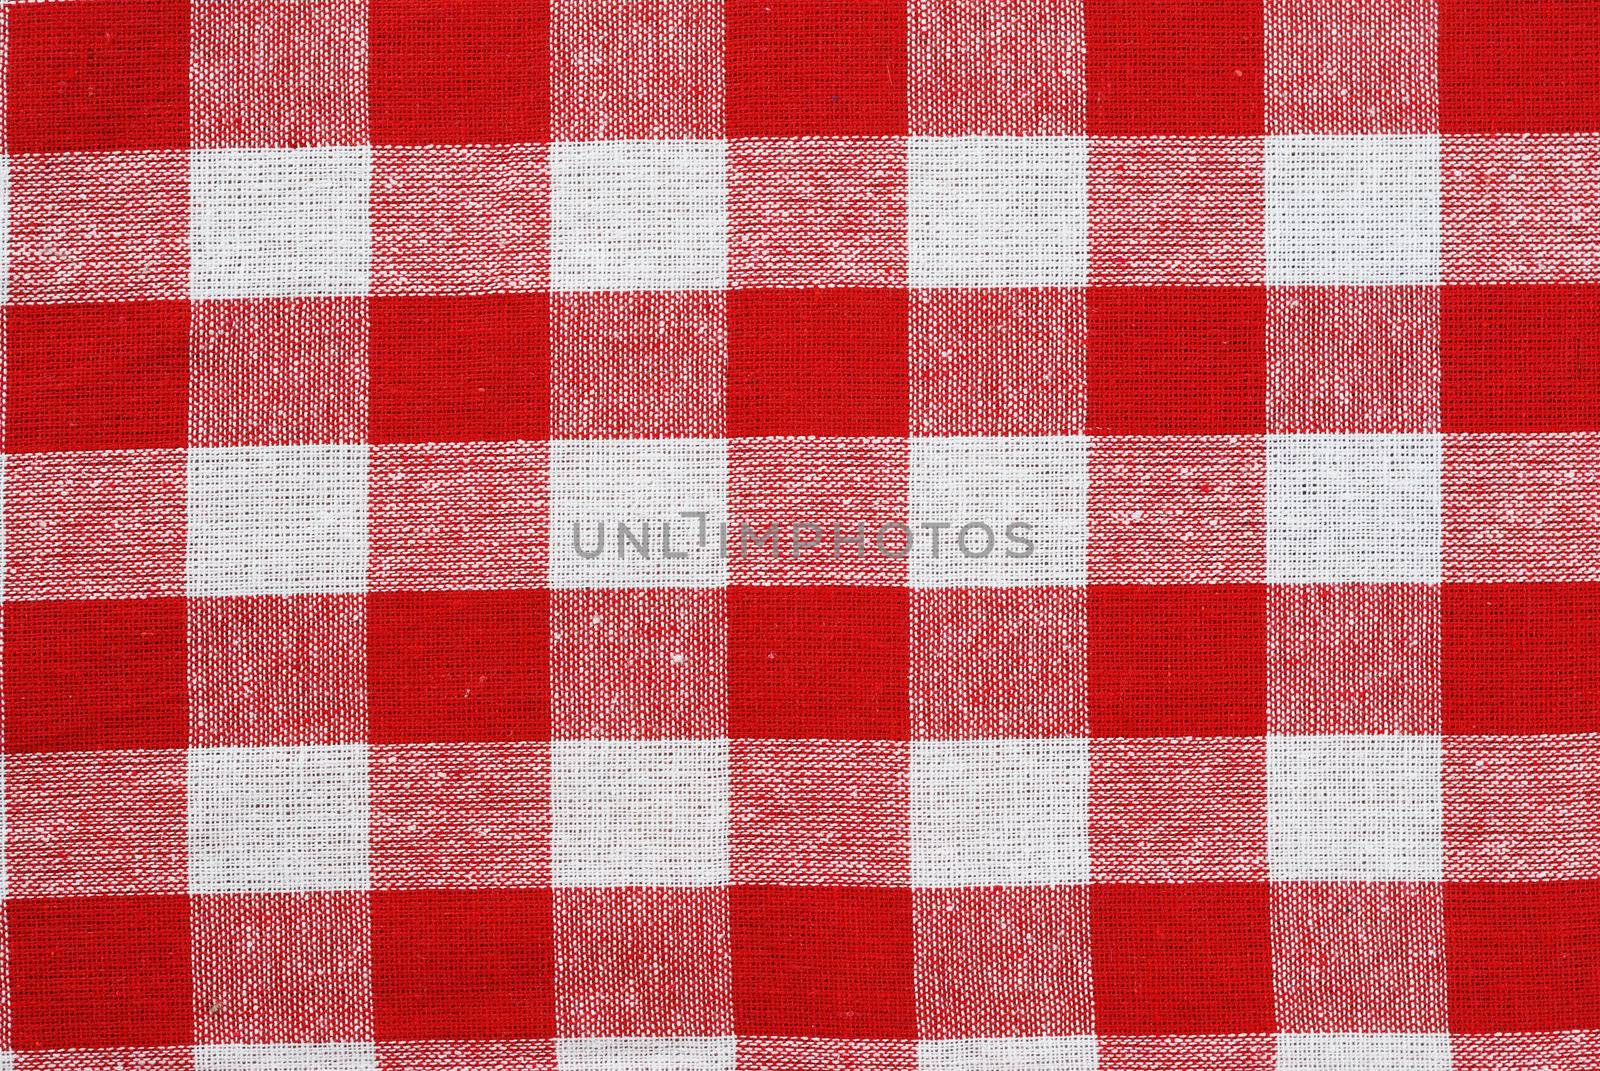 Classic picnic cloth by haveseen